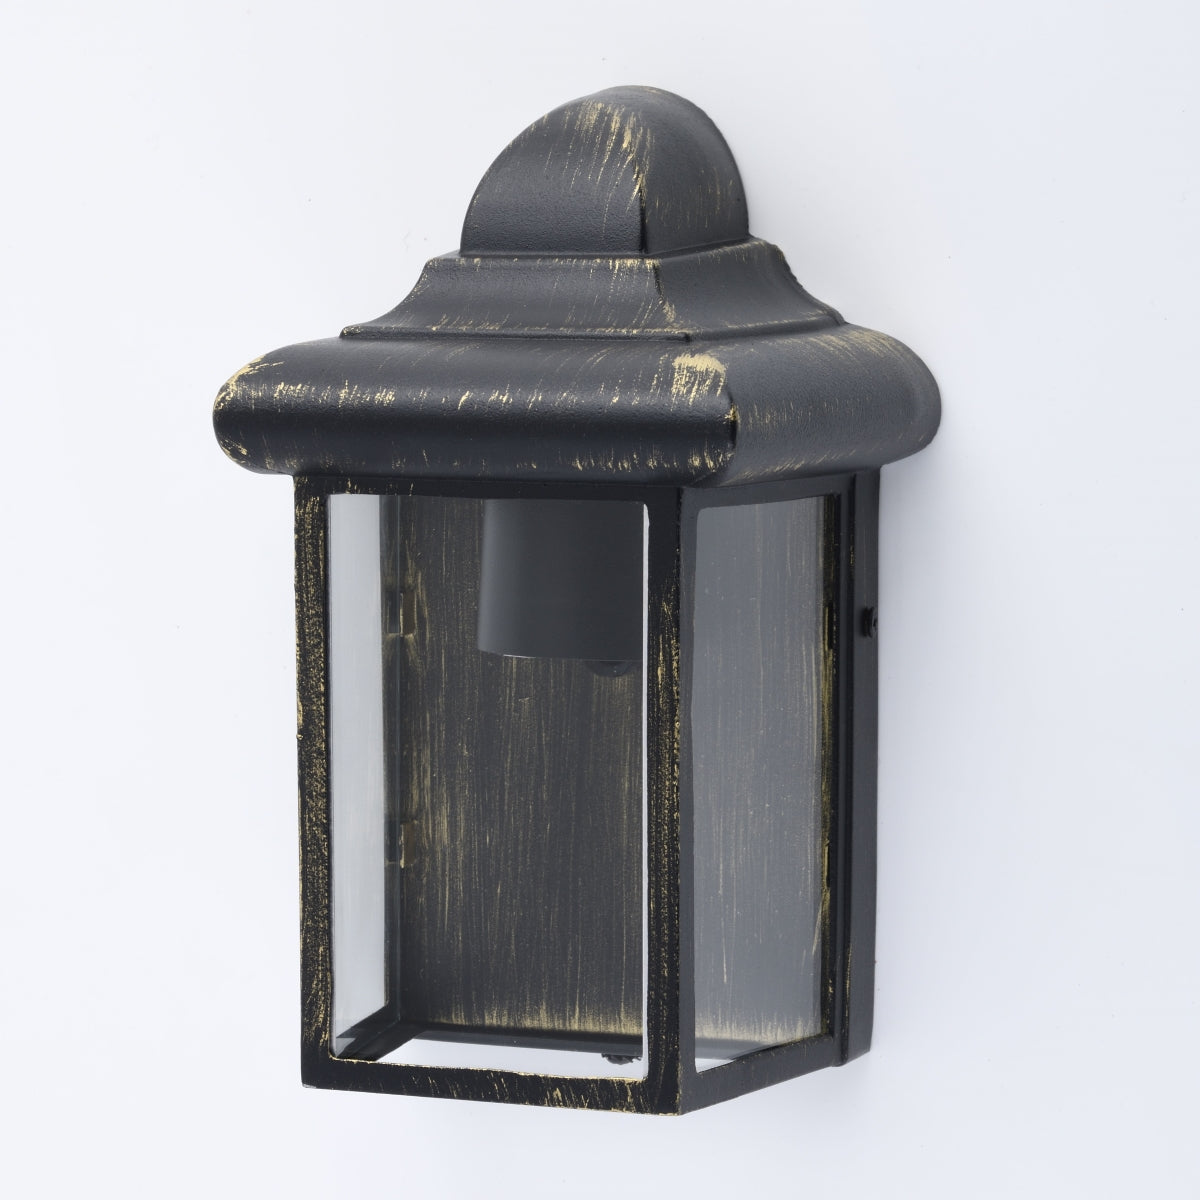 Our Camila wall lantern light is styled with a sophisticated black and bronze colour scheme, allowing the wall light to fit into any home’s style. What’s more, the lantern’s design is a modern take on a traditional styled wall light, creating a flexible look for interior and exterior use.&nbsp;